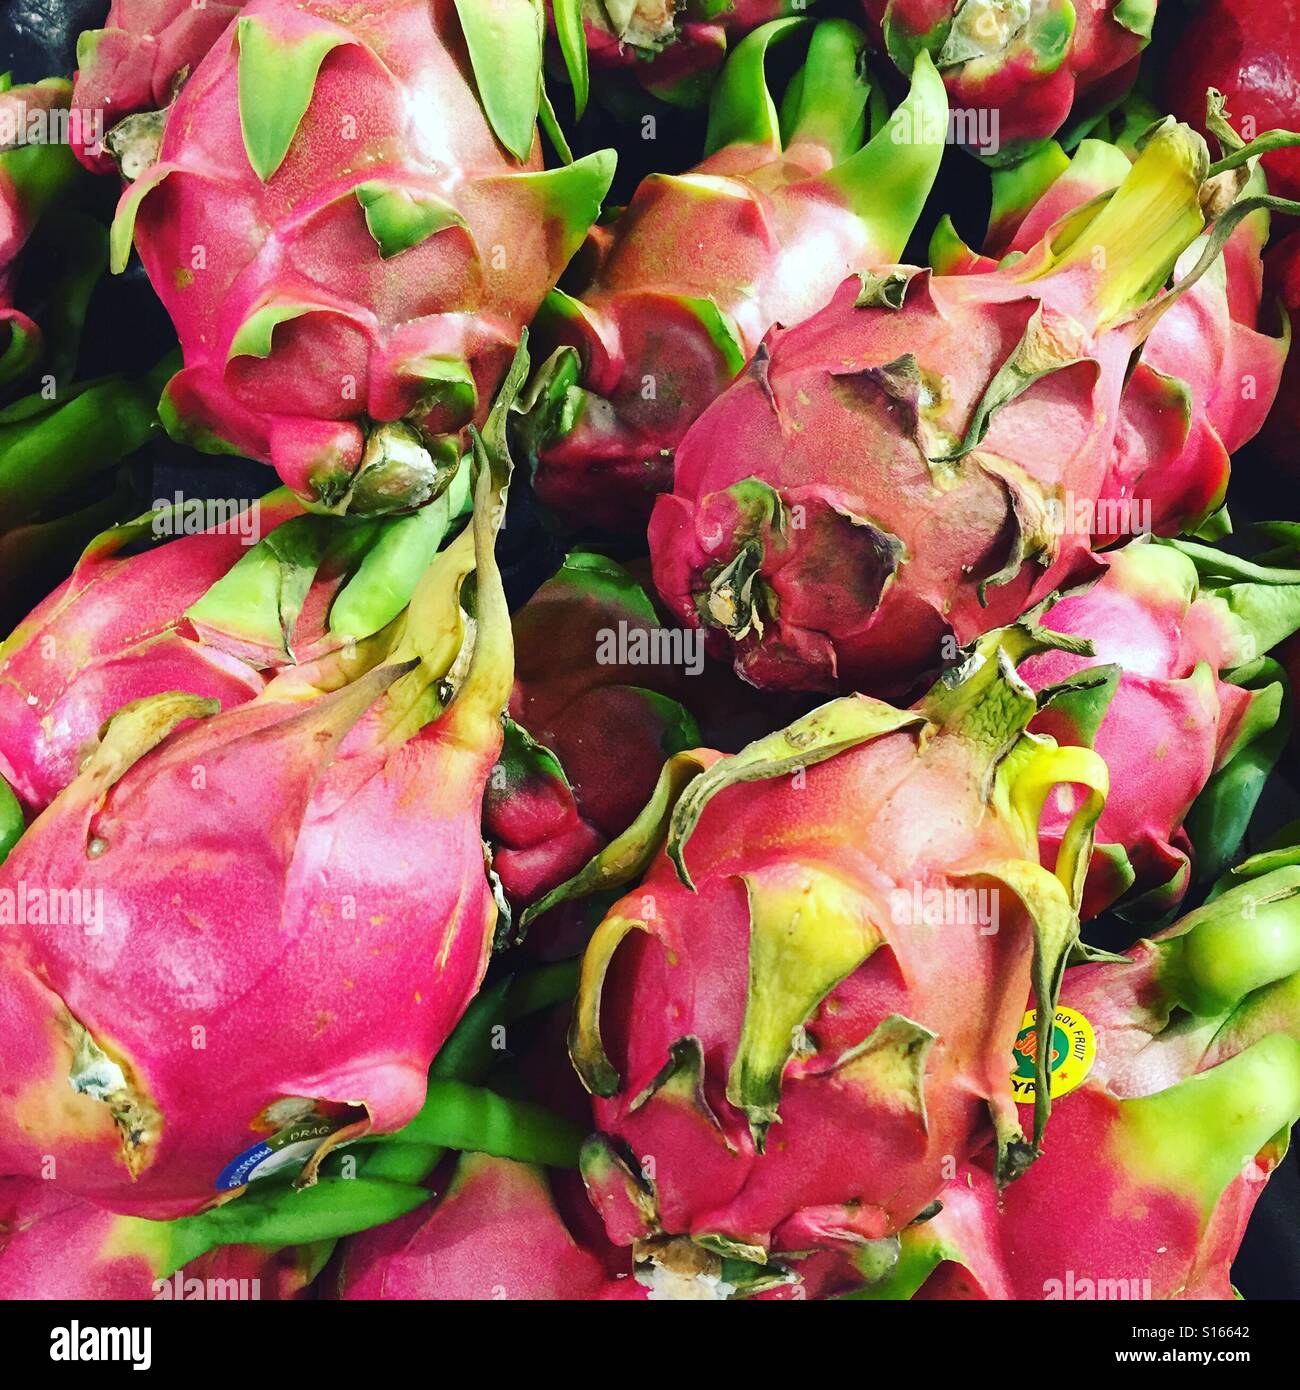 Dragon fruits by K.R. Stock Photo